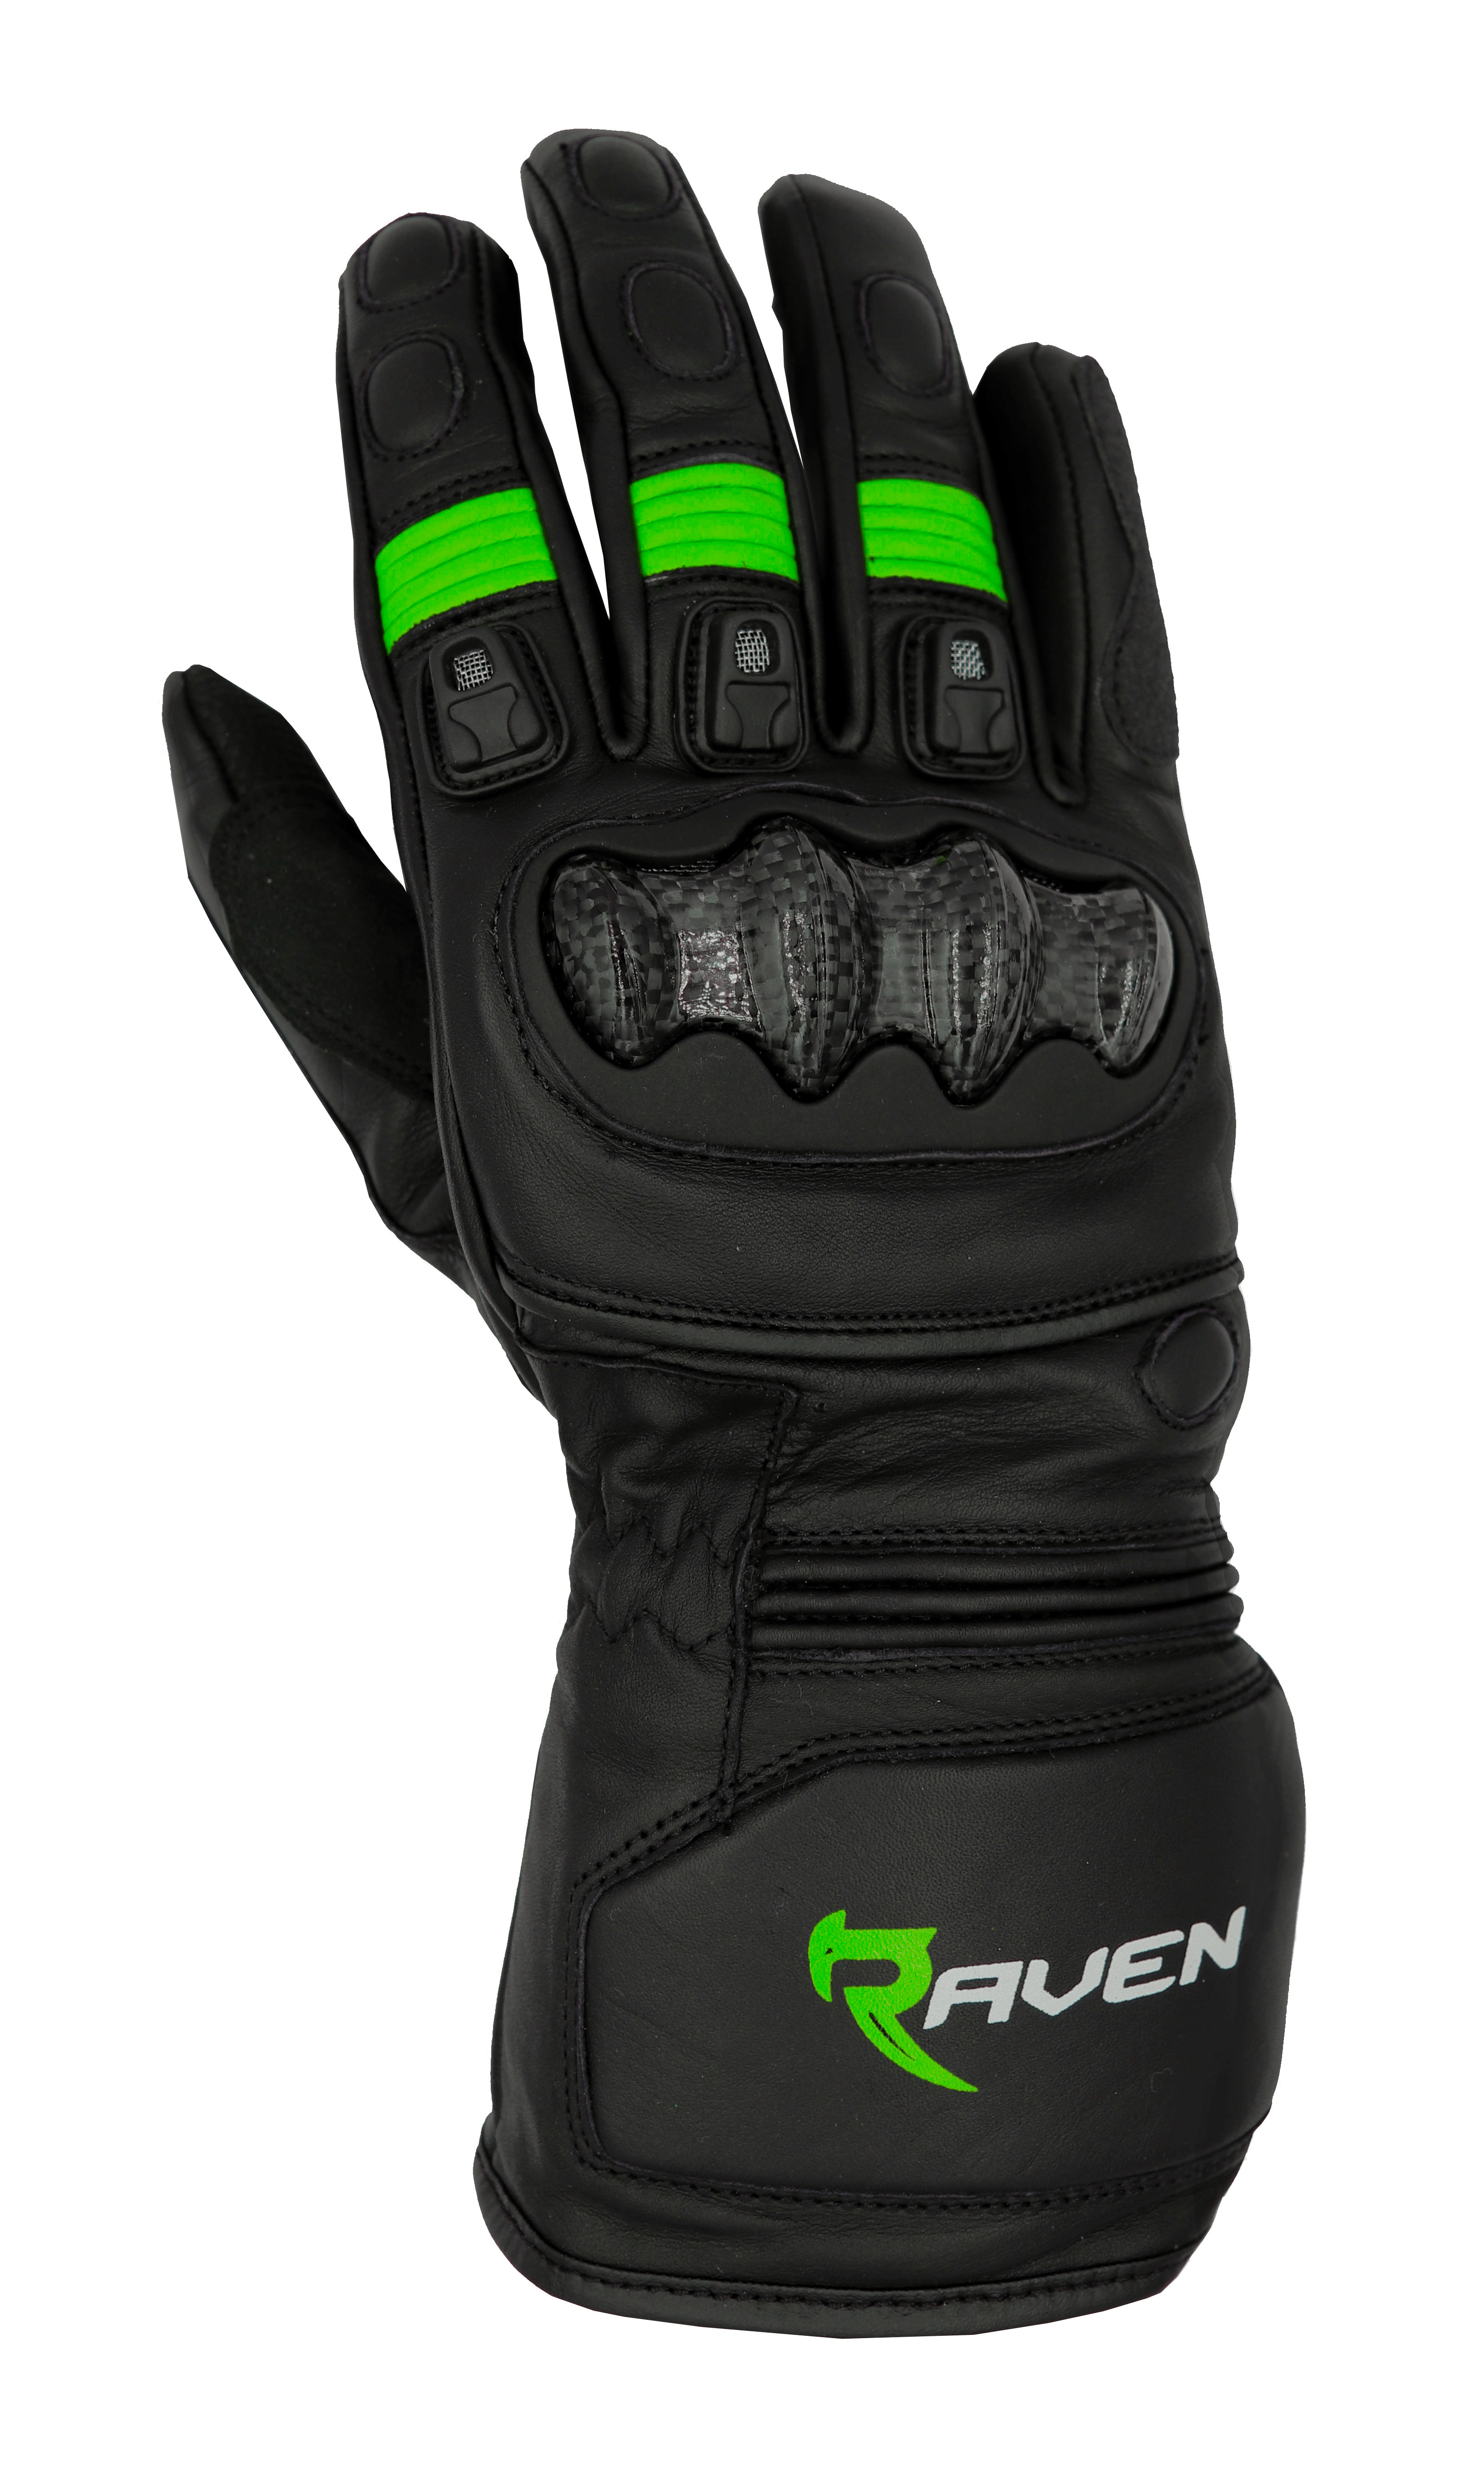 ROGUE - Black and Green Leather Motorcycle Long Cuff Gauntlet Glove by RAVEN Moto